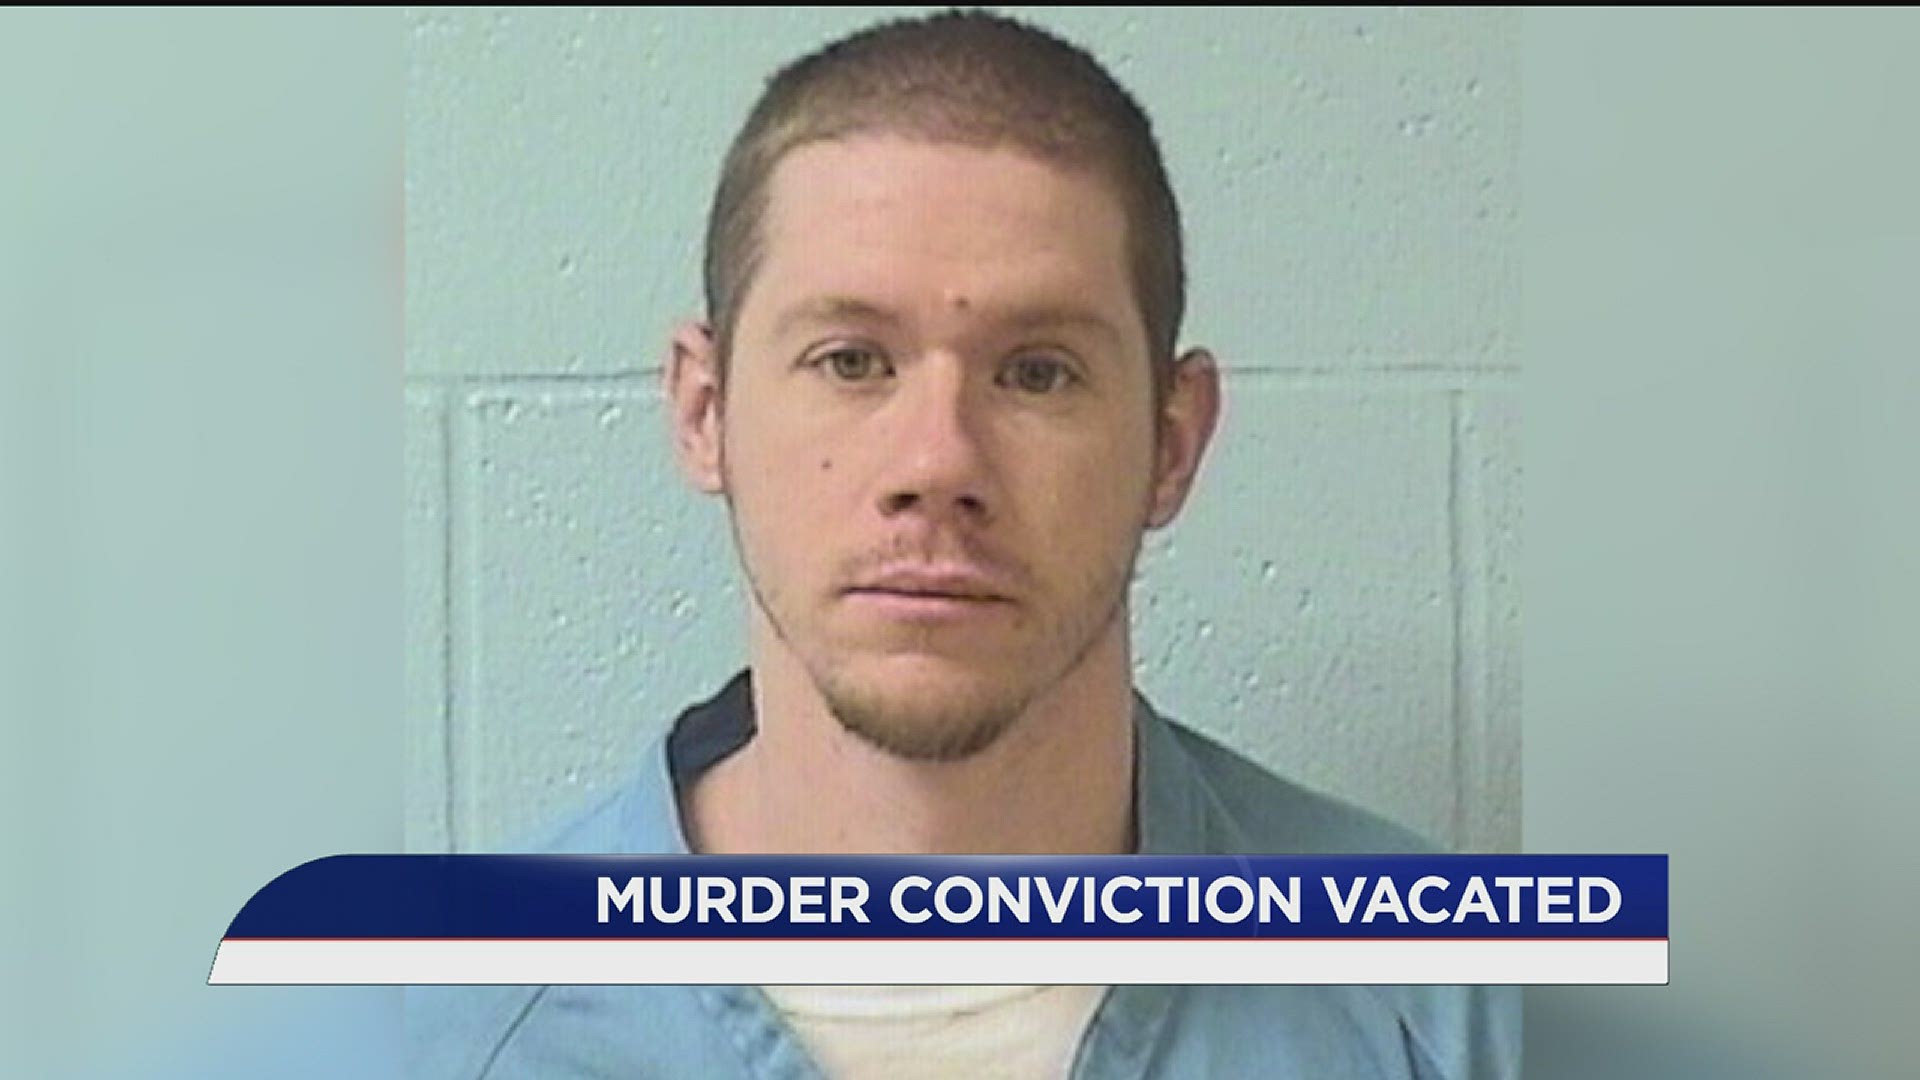 Rock Island County State's Attorney vacated a 2008 murder conviction